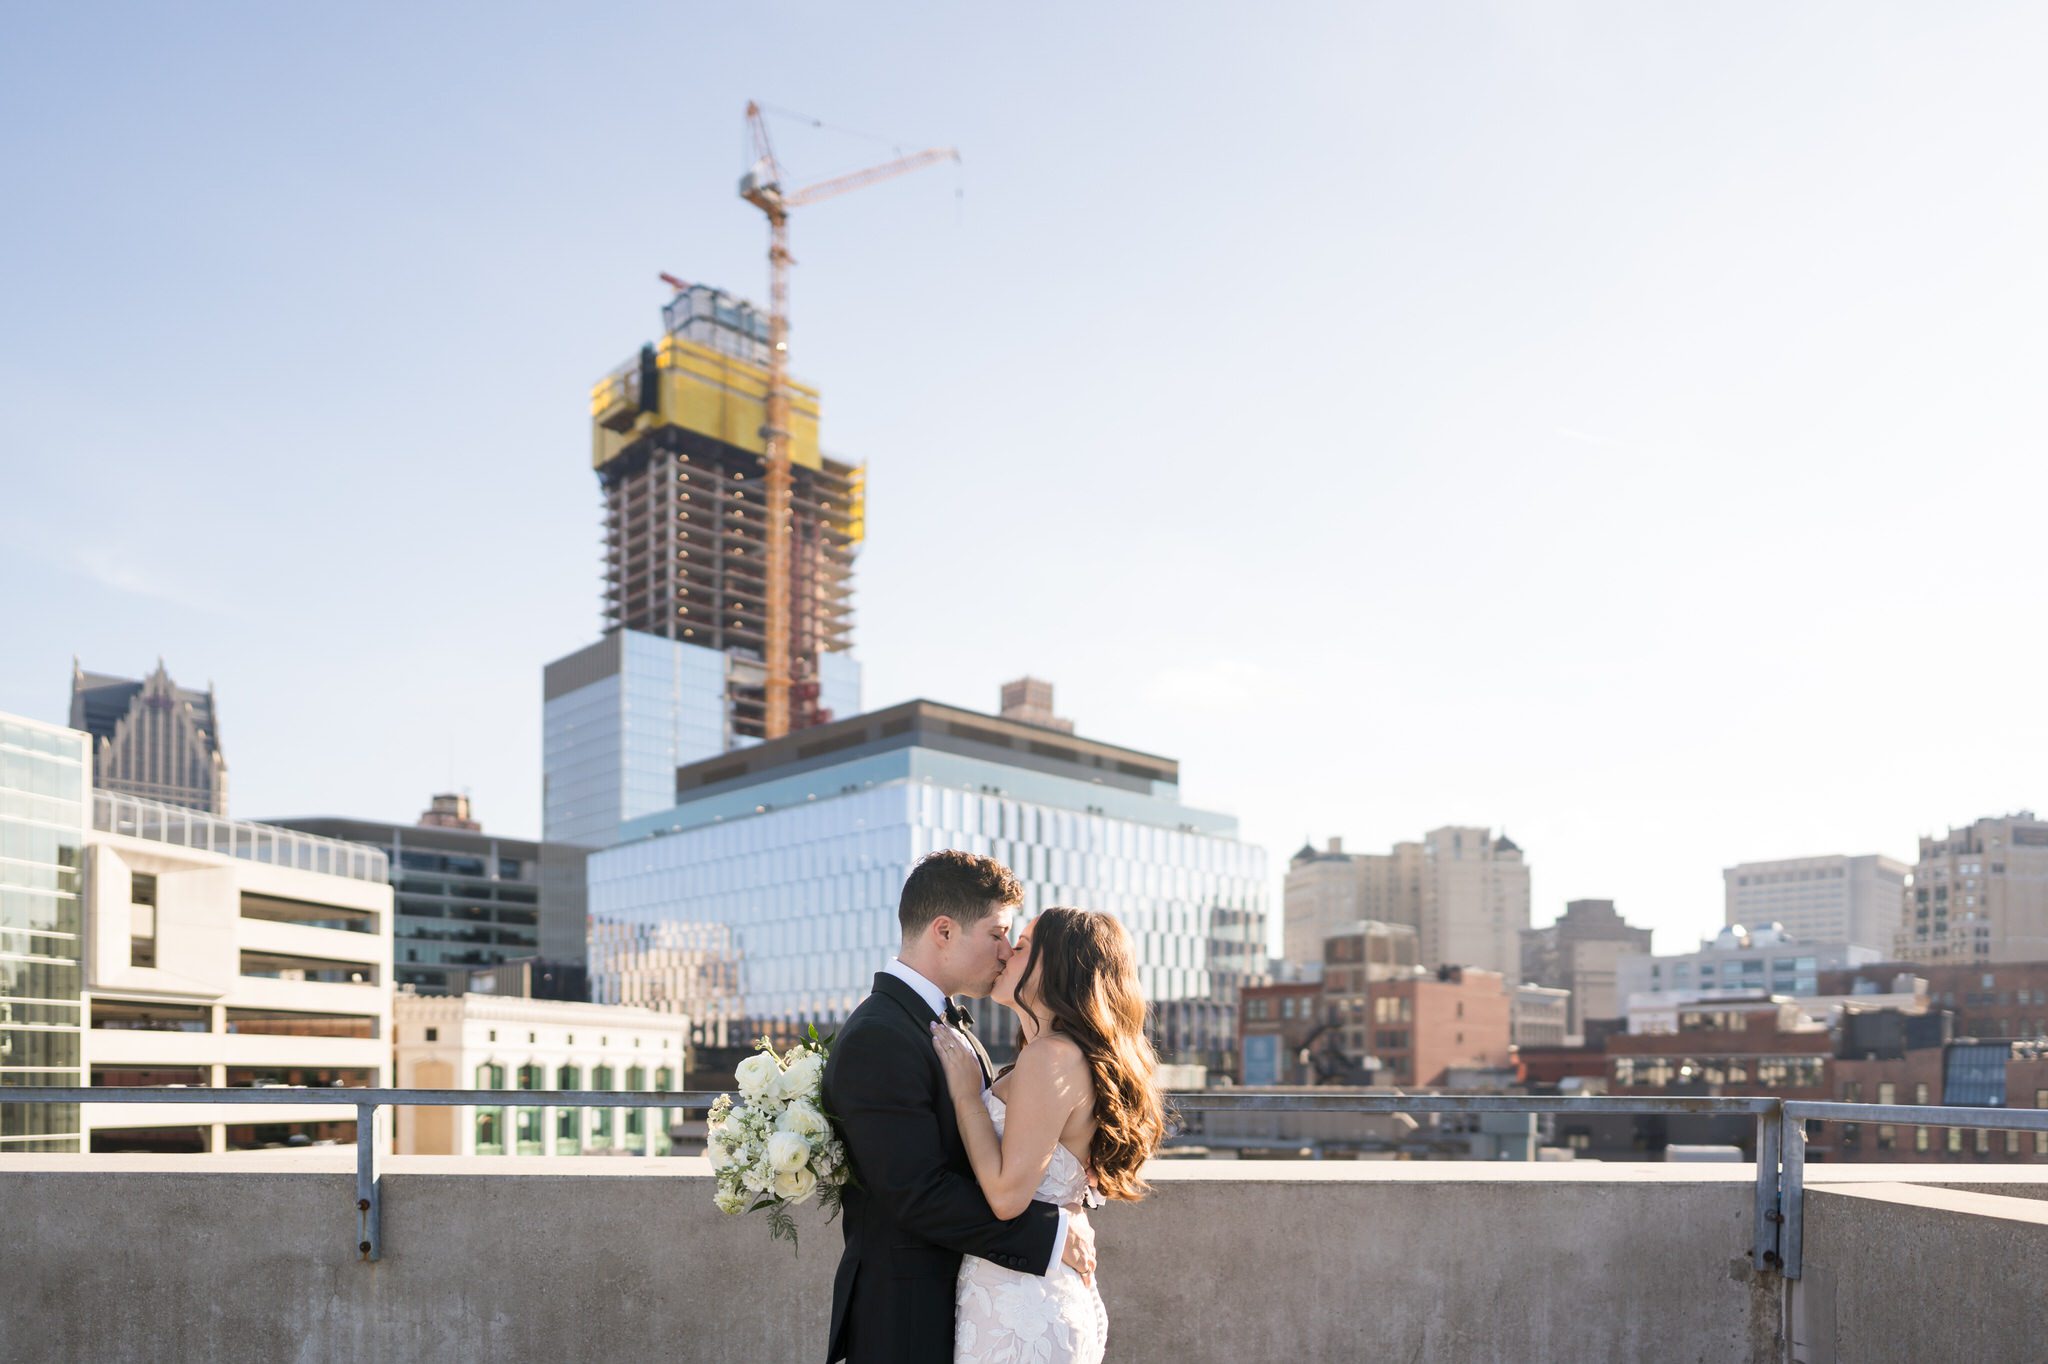 A bride and groom kiss on a Detroit rooftop with the skyline in the background.   